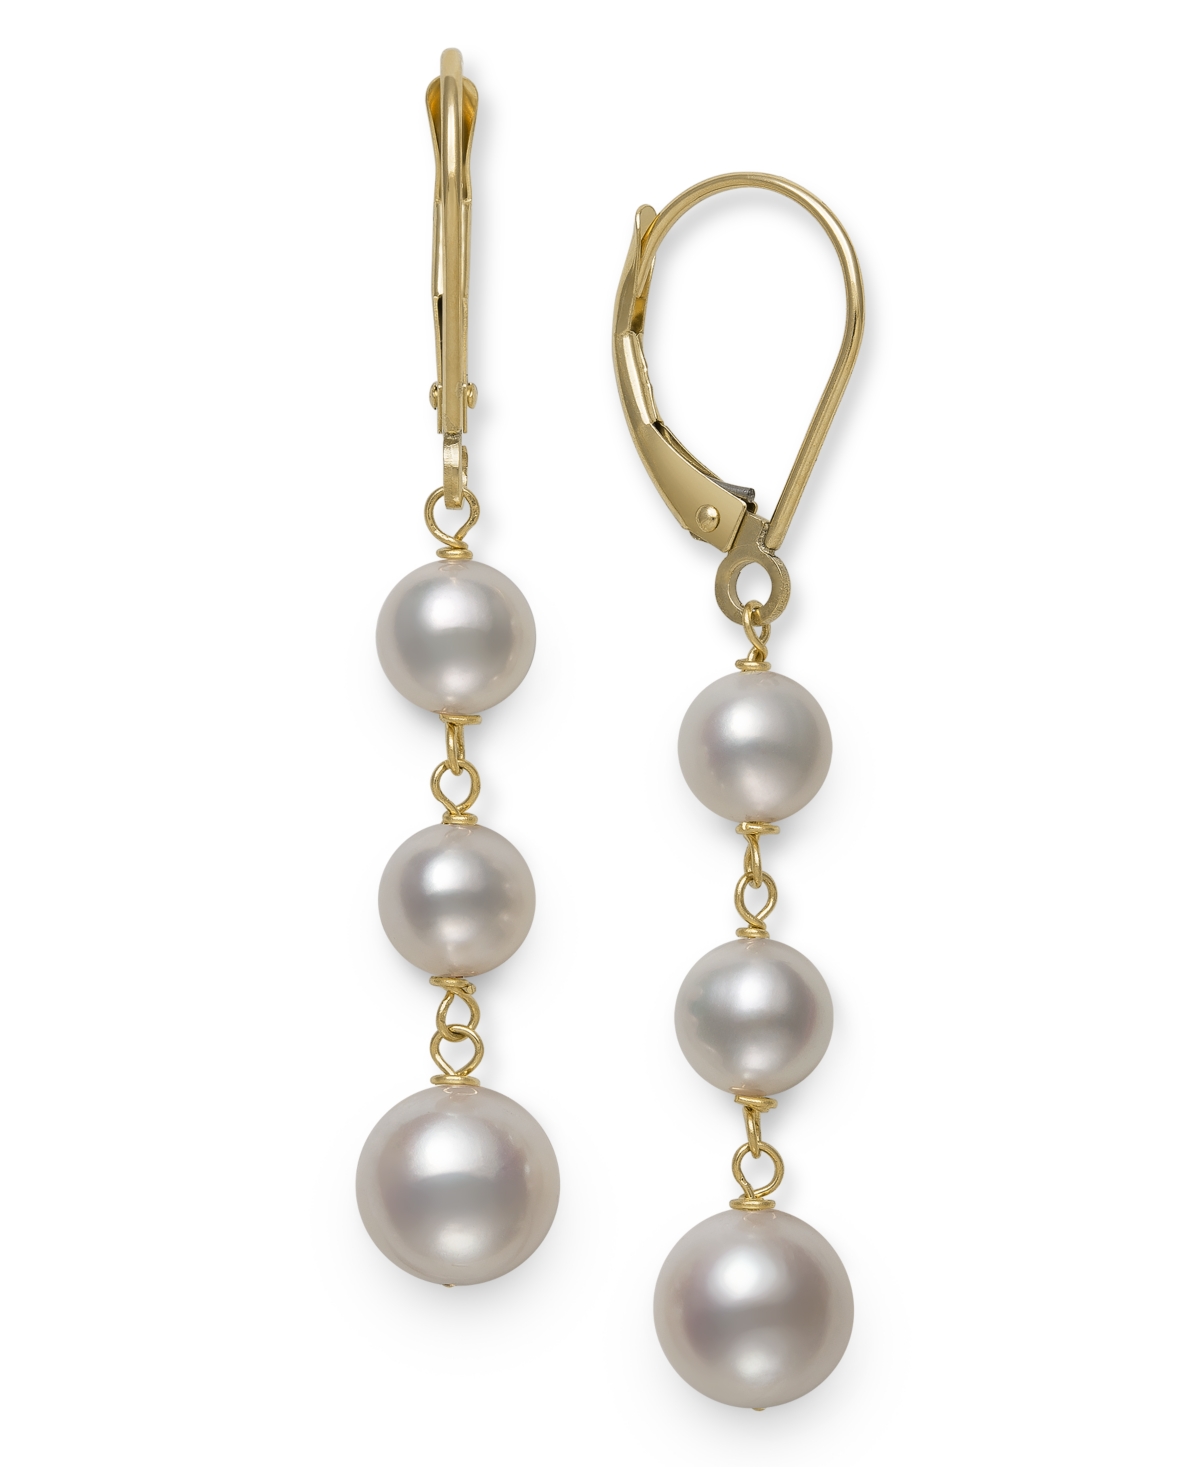 Belle De Mer White Cultured Freshwater Pearl (5-8 mm) Leverback Earrings in 14k Yellow Gold. Also available in black, pink, white pink lavender multi and white gray black multi.